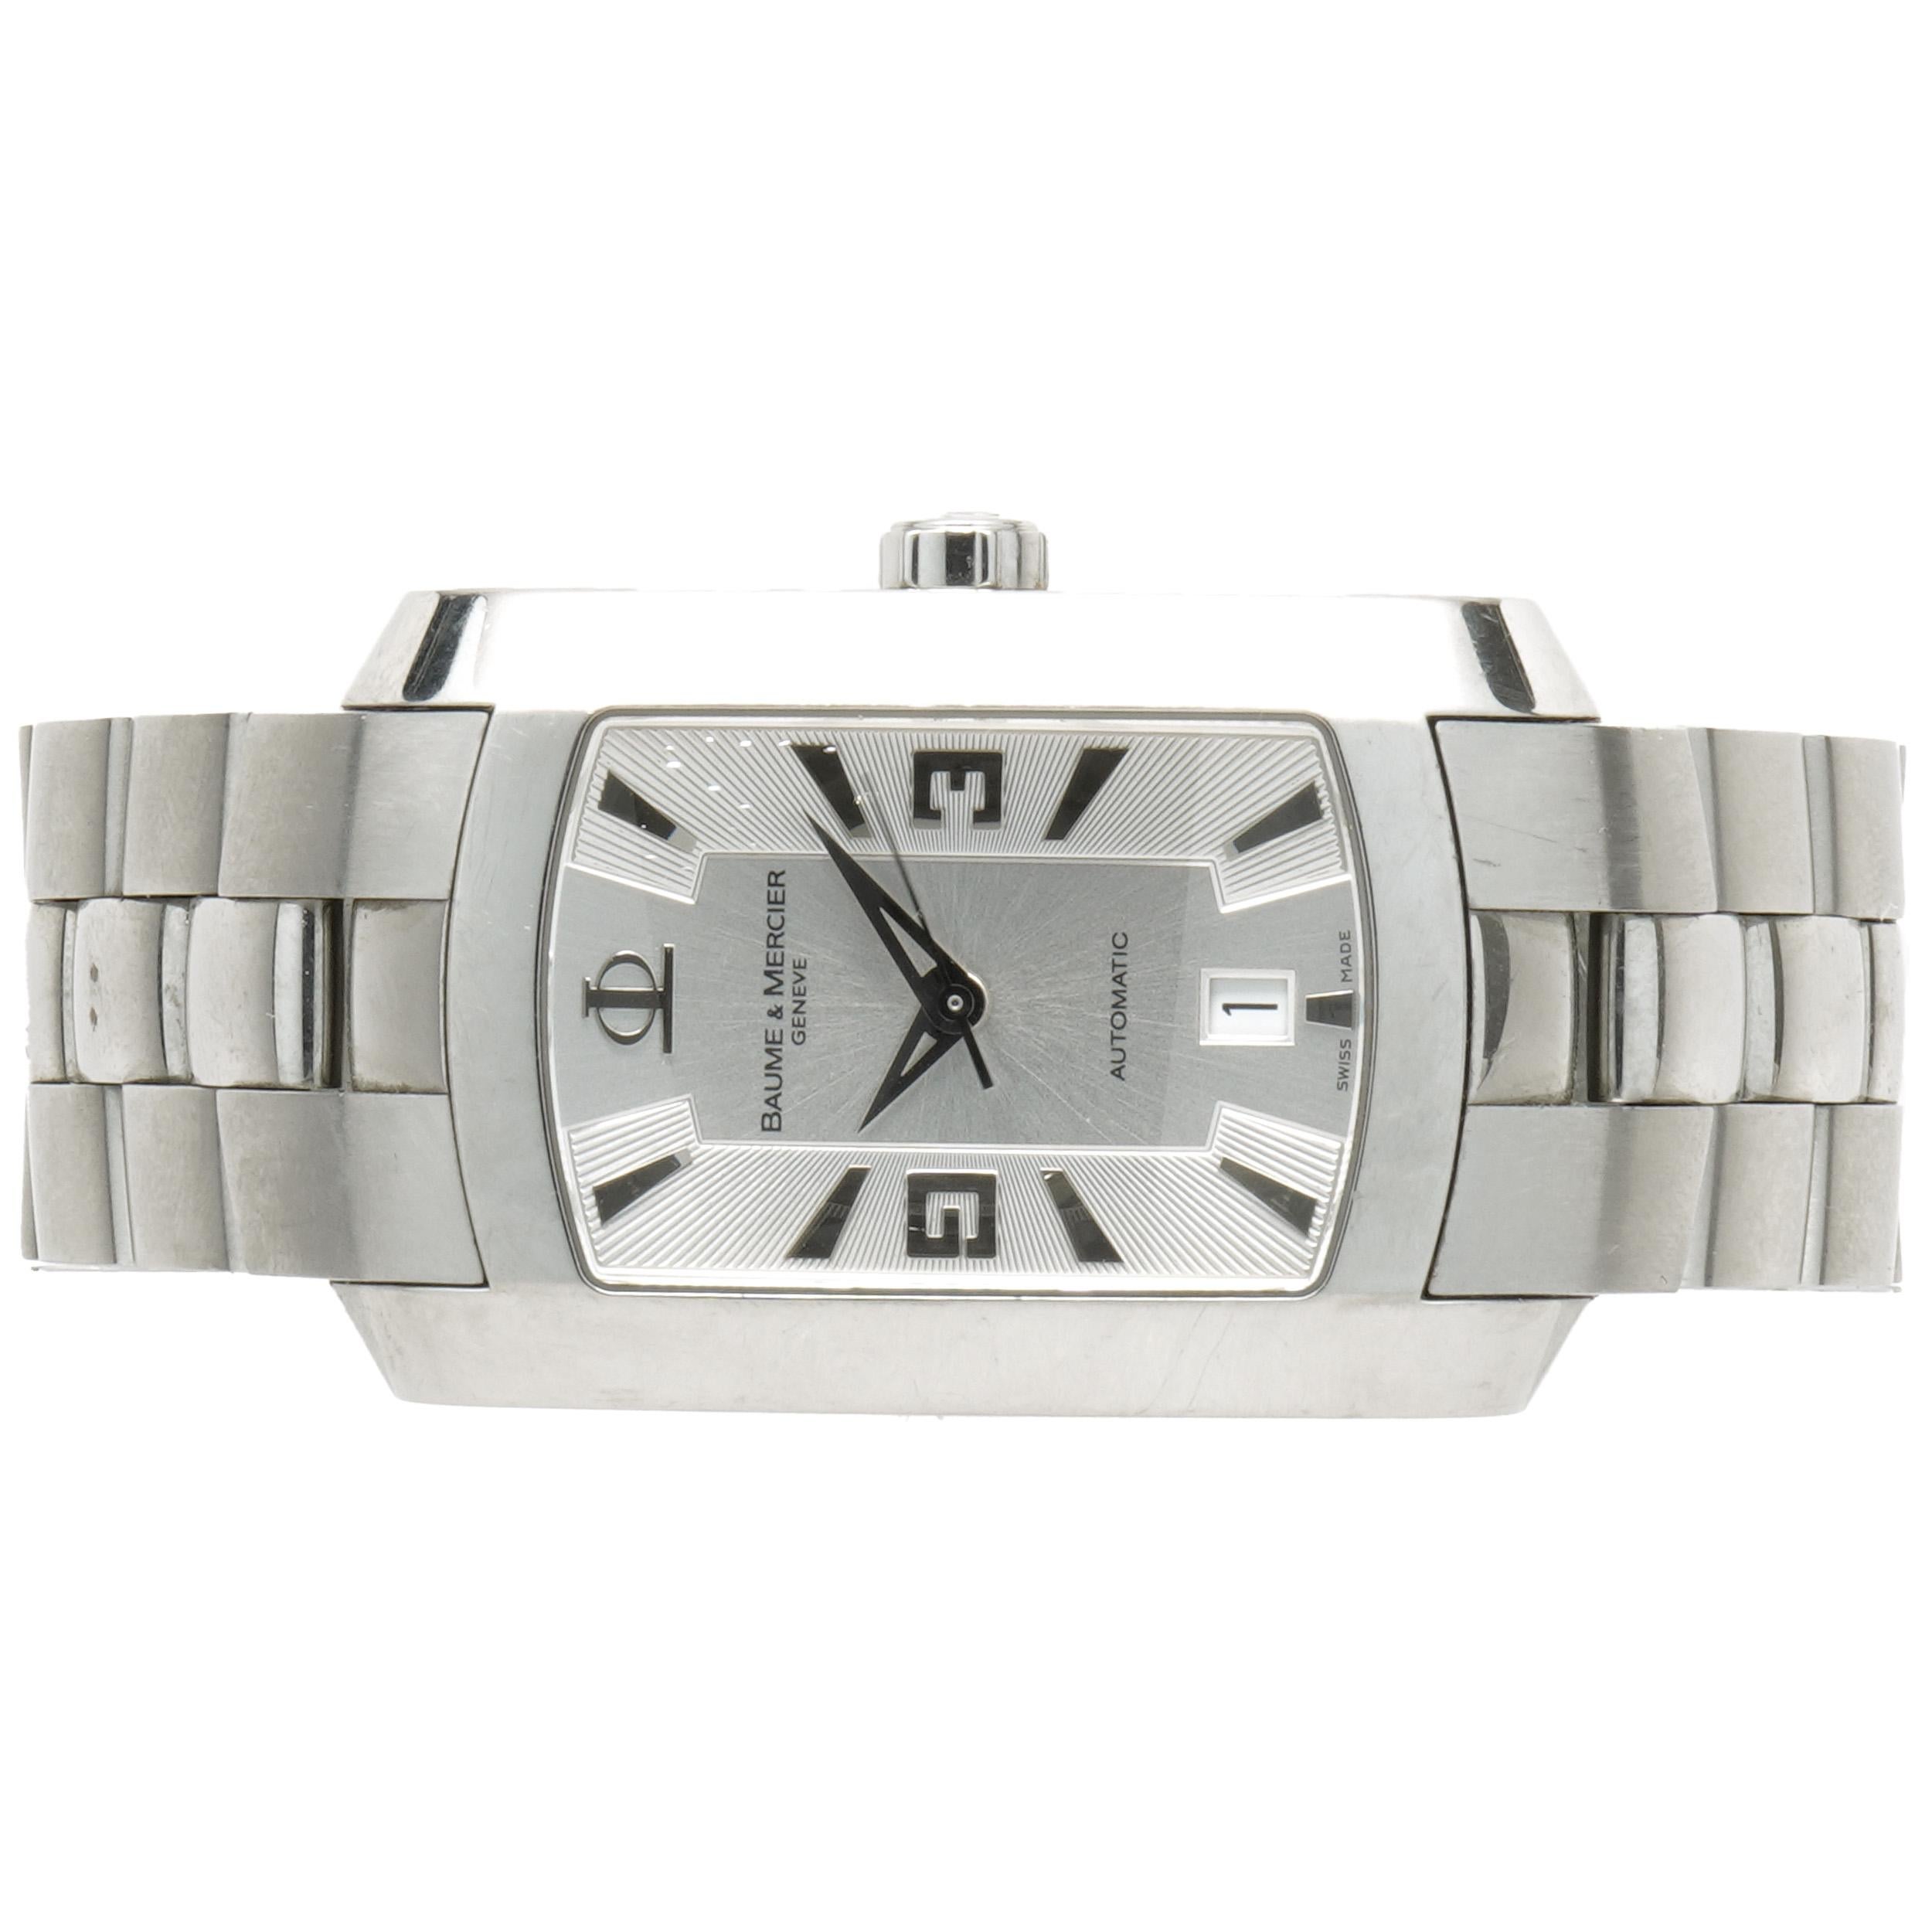 Movement: automatic
Function: hours, minutes, seconds, date
Case: 30mm rectangular stainless steel case, smooth bezel, push/pull crown, sapphire crystal
Band: stainless steel, integrated clasp
Dial: silver stick/arabic
Serial # 4693XXX
Reference #